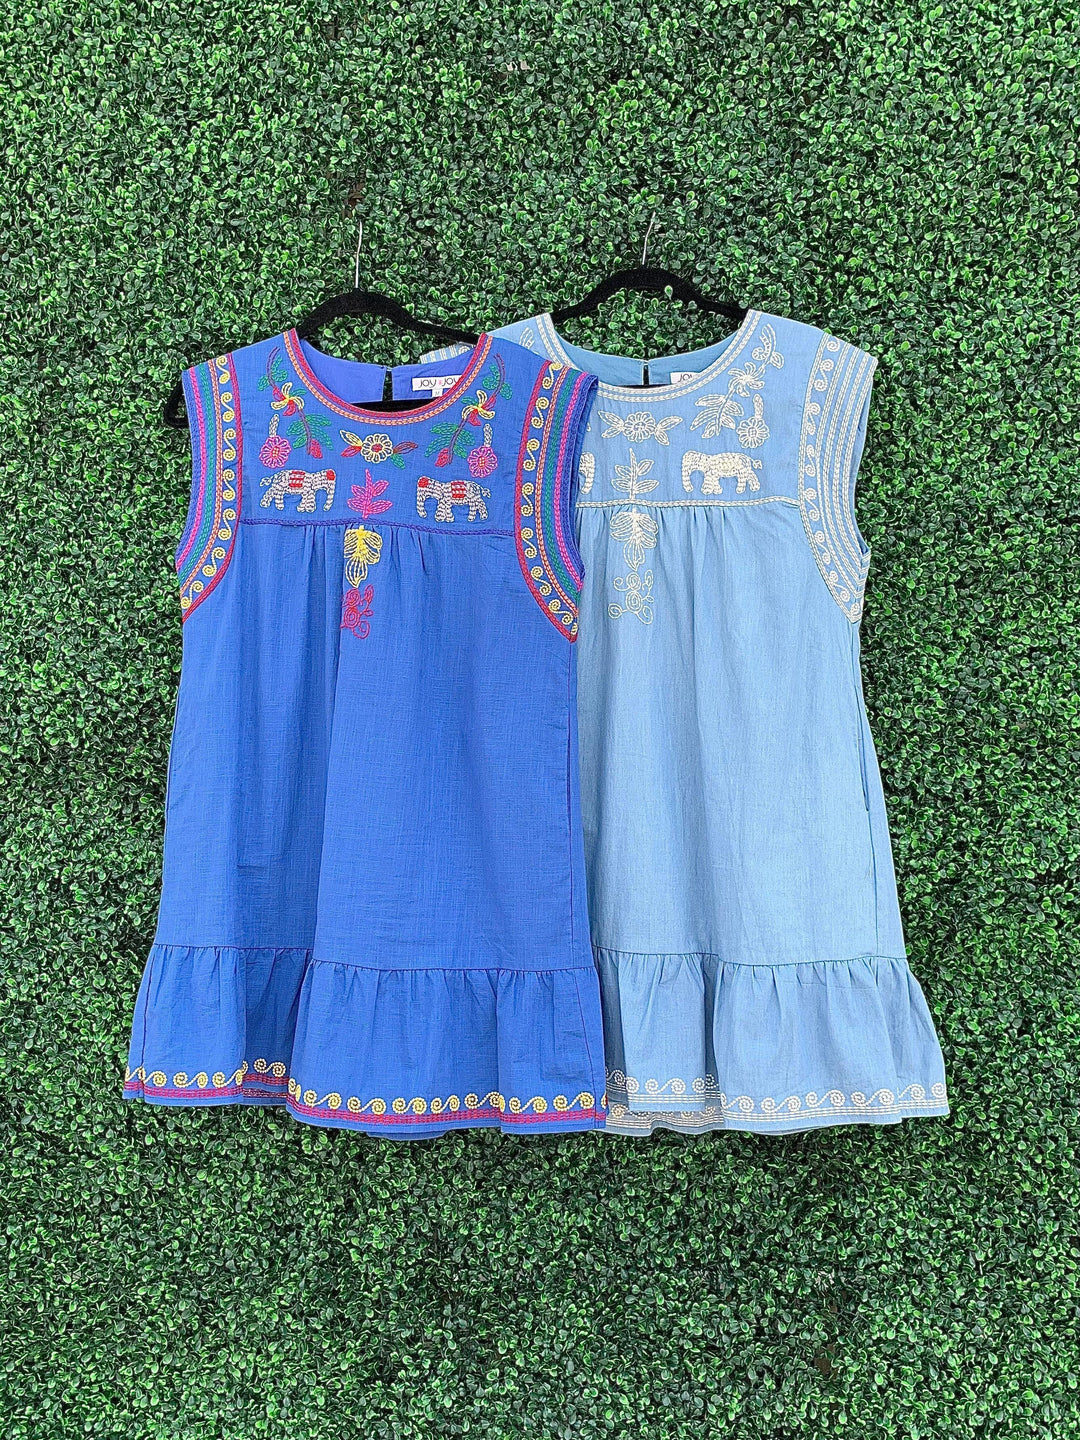 Two colors of the dress from tres Chic with elephants on it